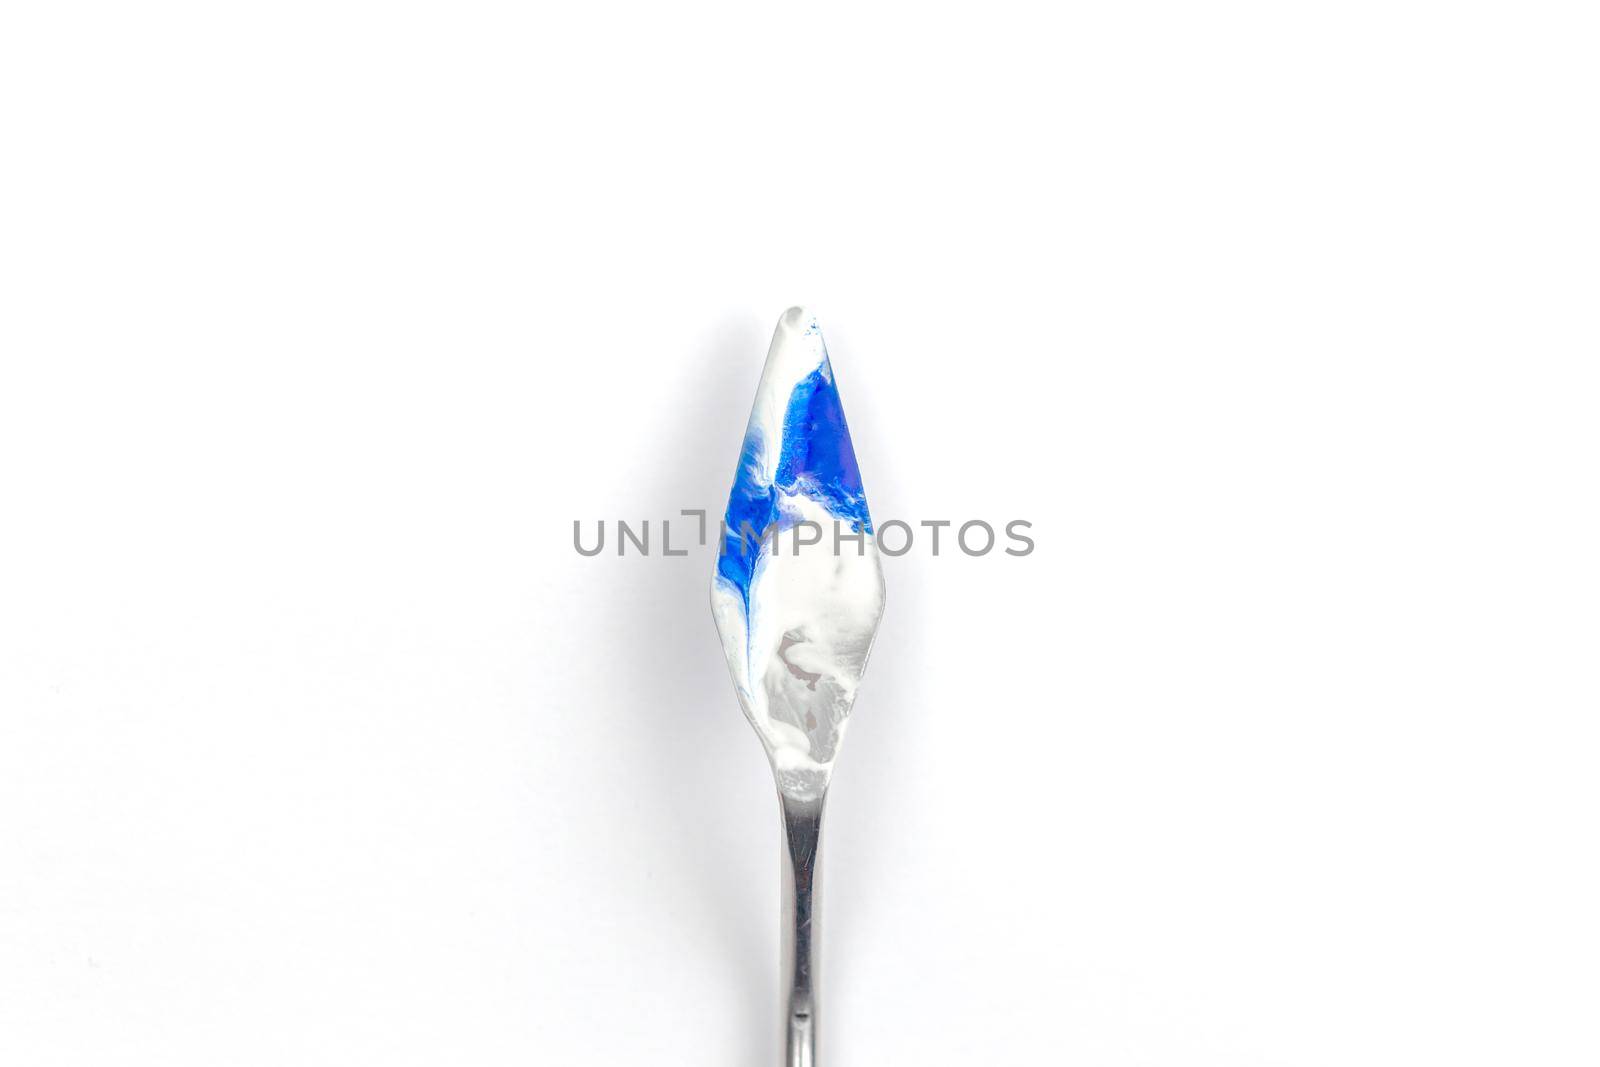 a painting palette knife isolated on a white background painting a blue teal with copy space. by lunarts